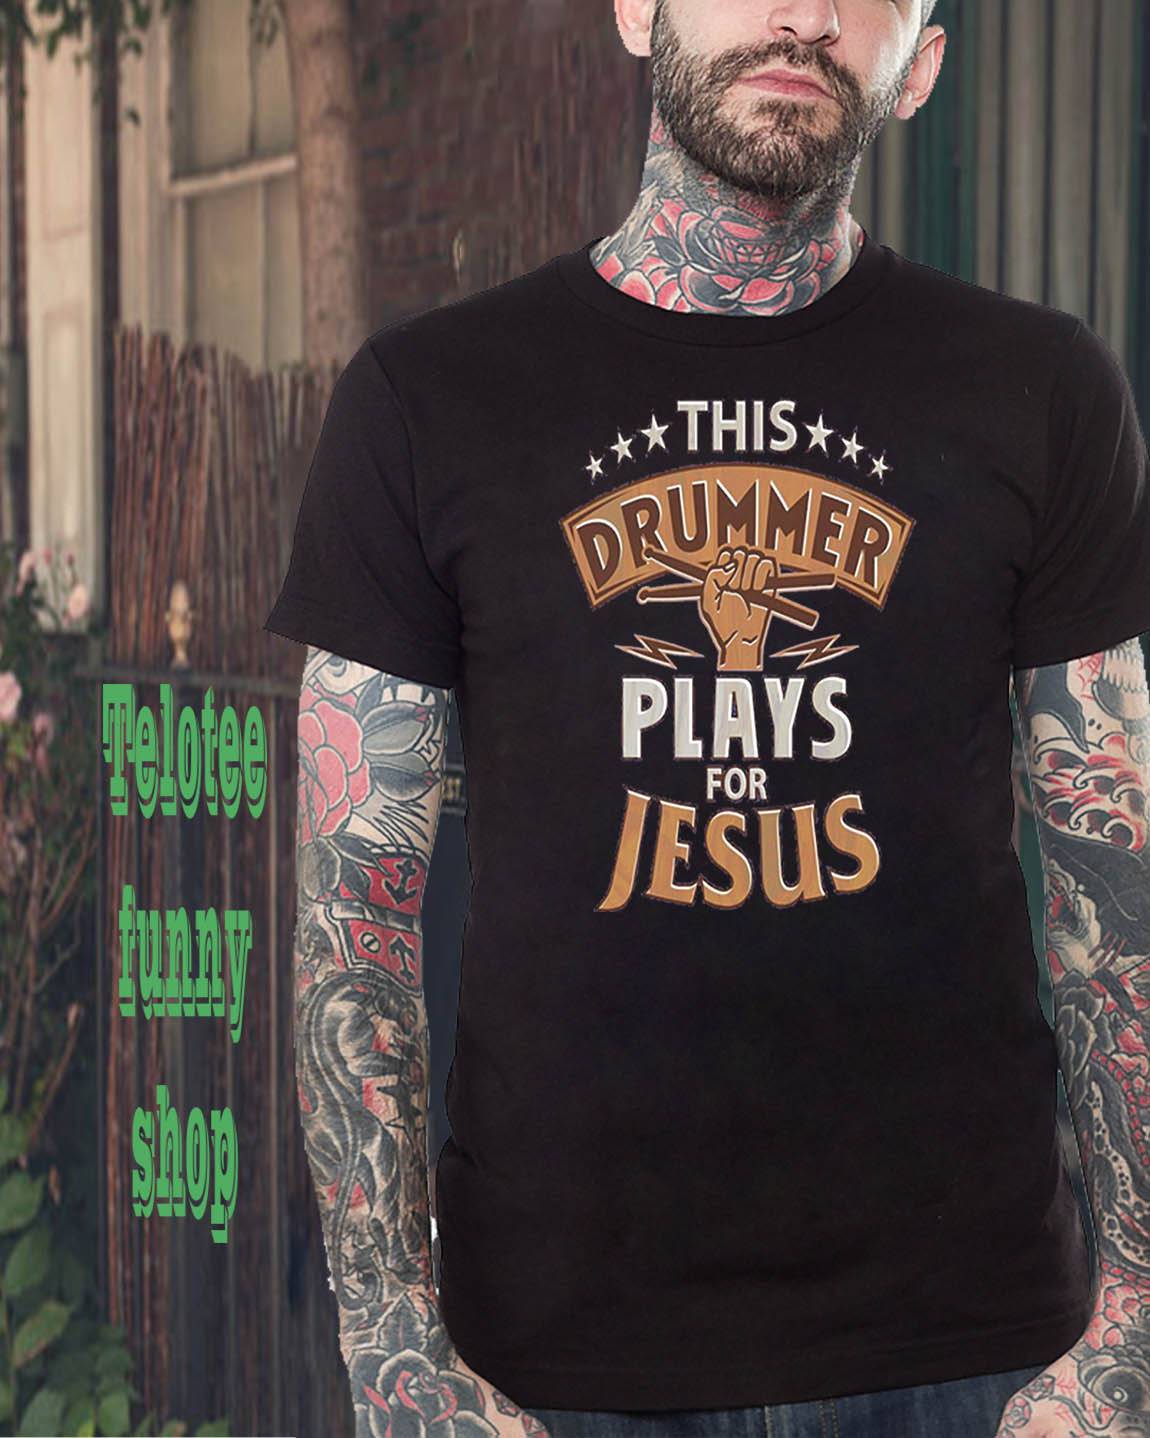 Awesome This drummer plays for jesus